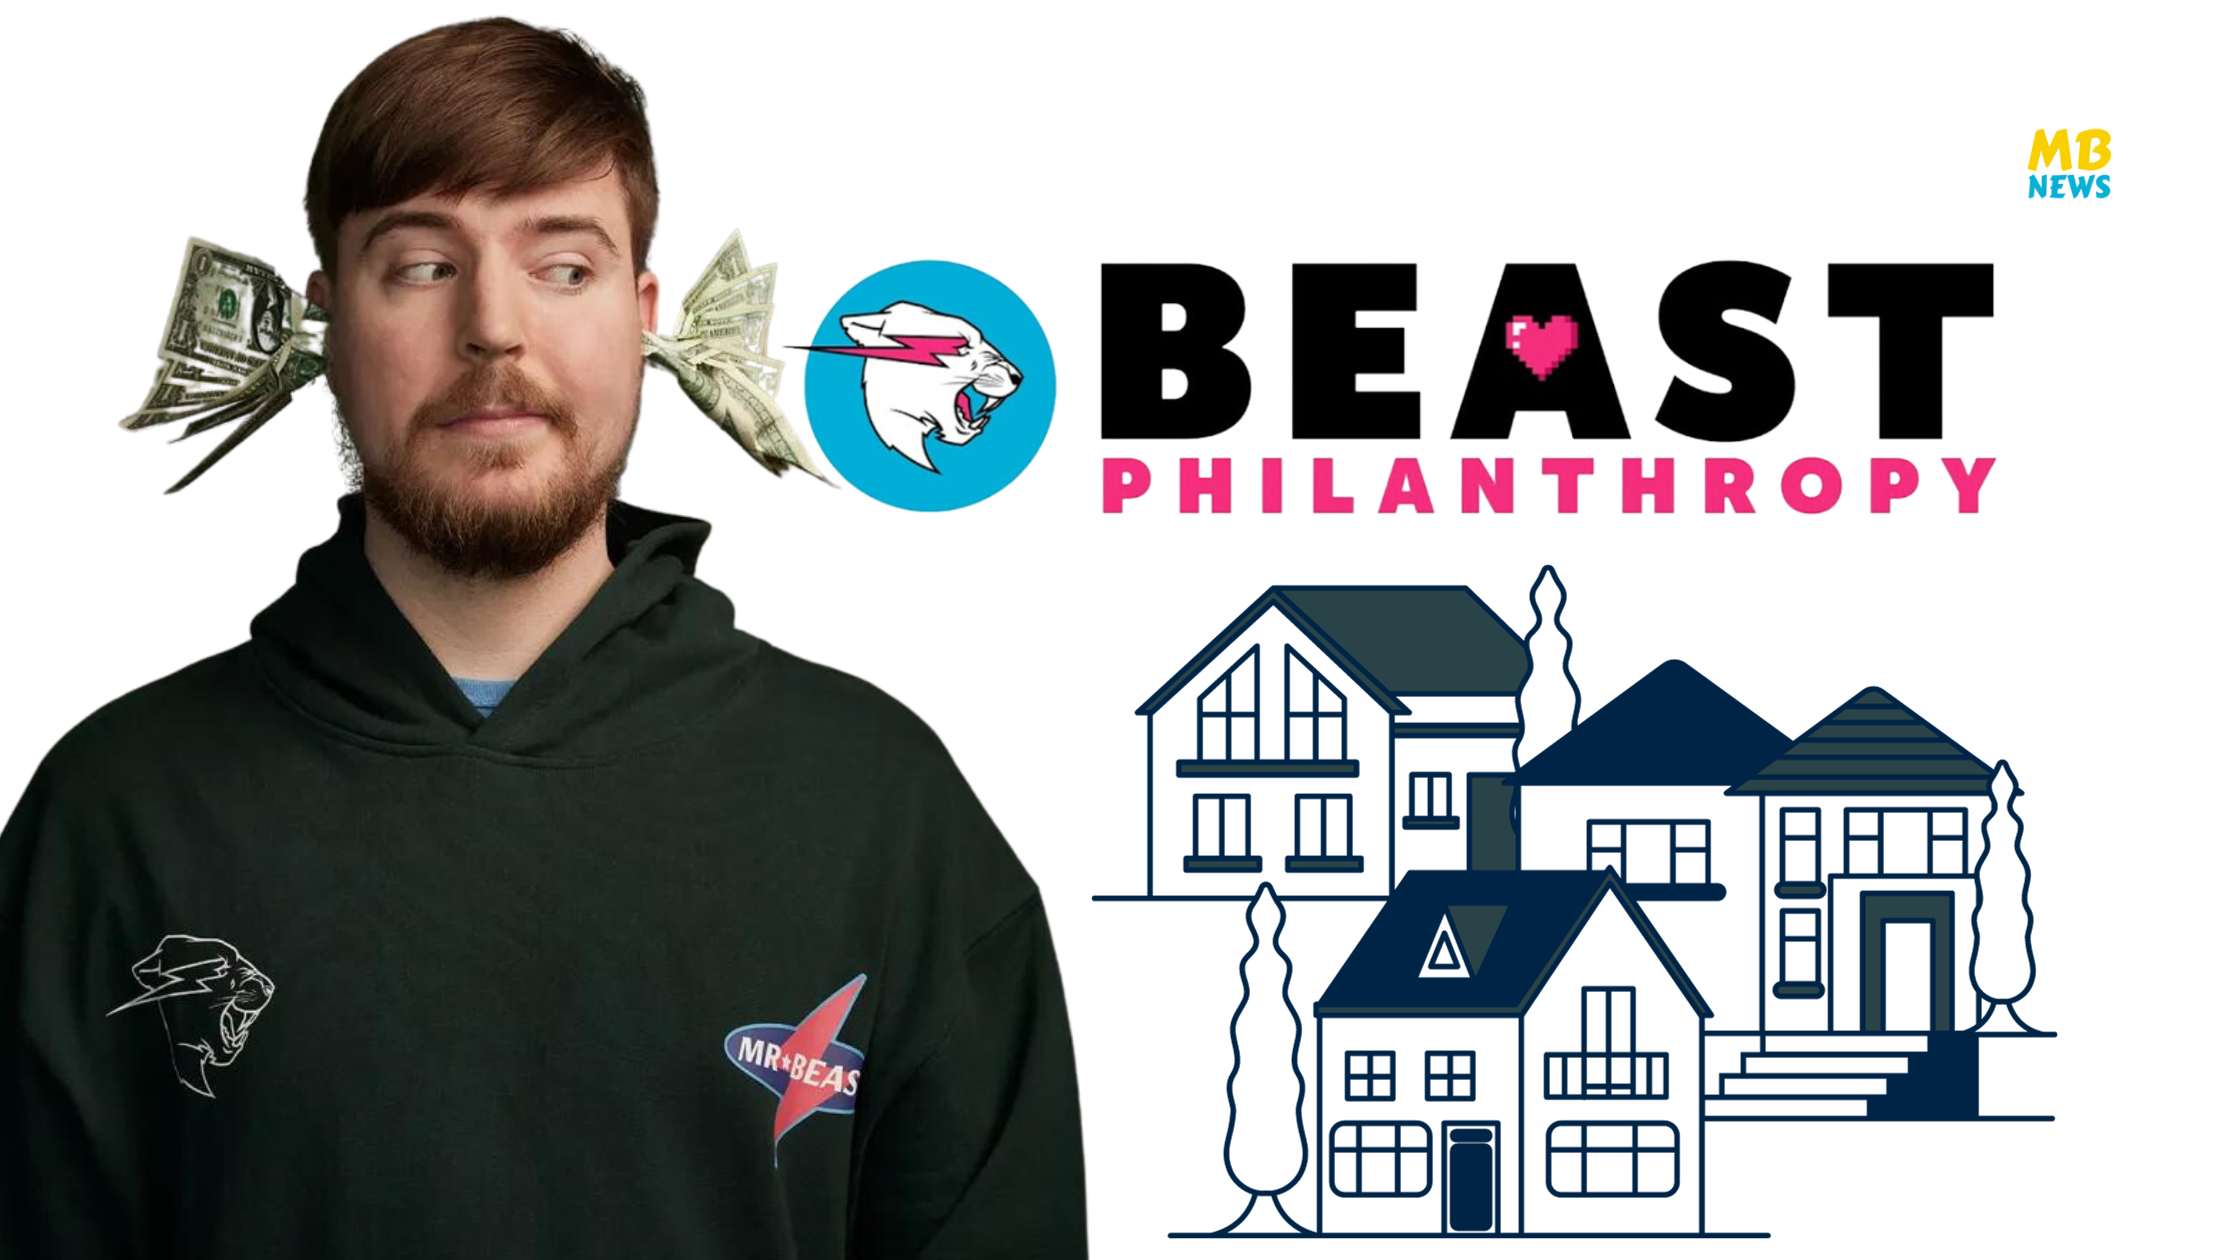 Techo and MrBeast Join Forces to Build Homes for Families in Latin America With Some Fantastic Prizes!